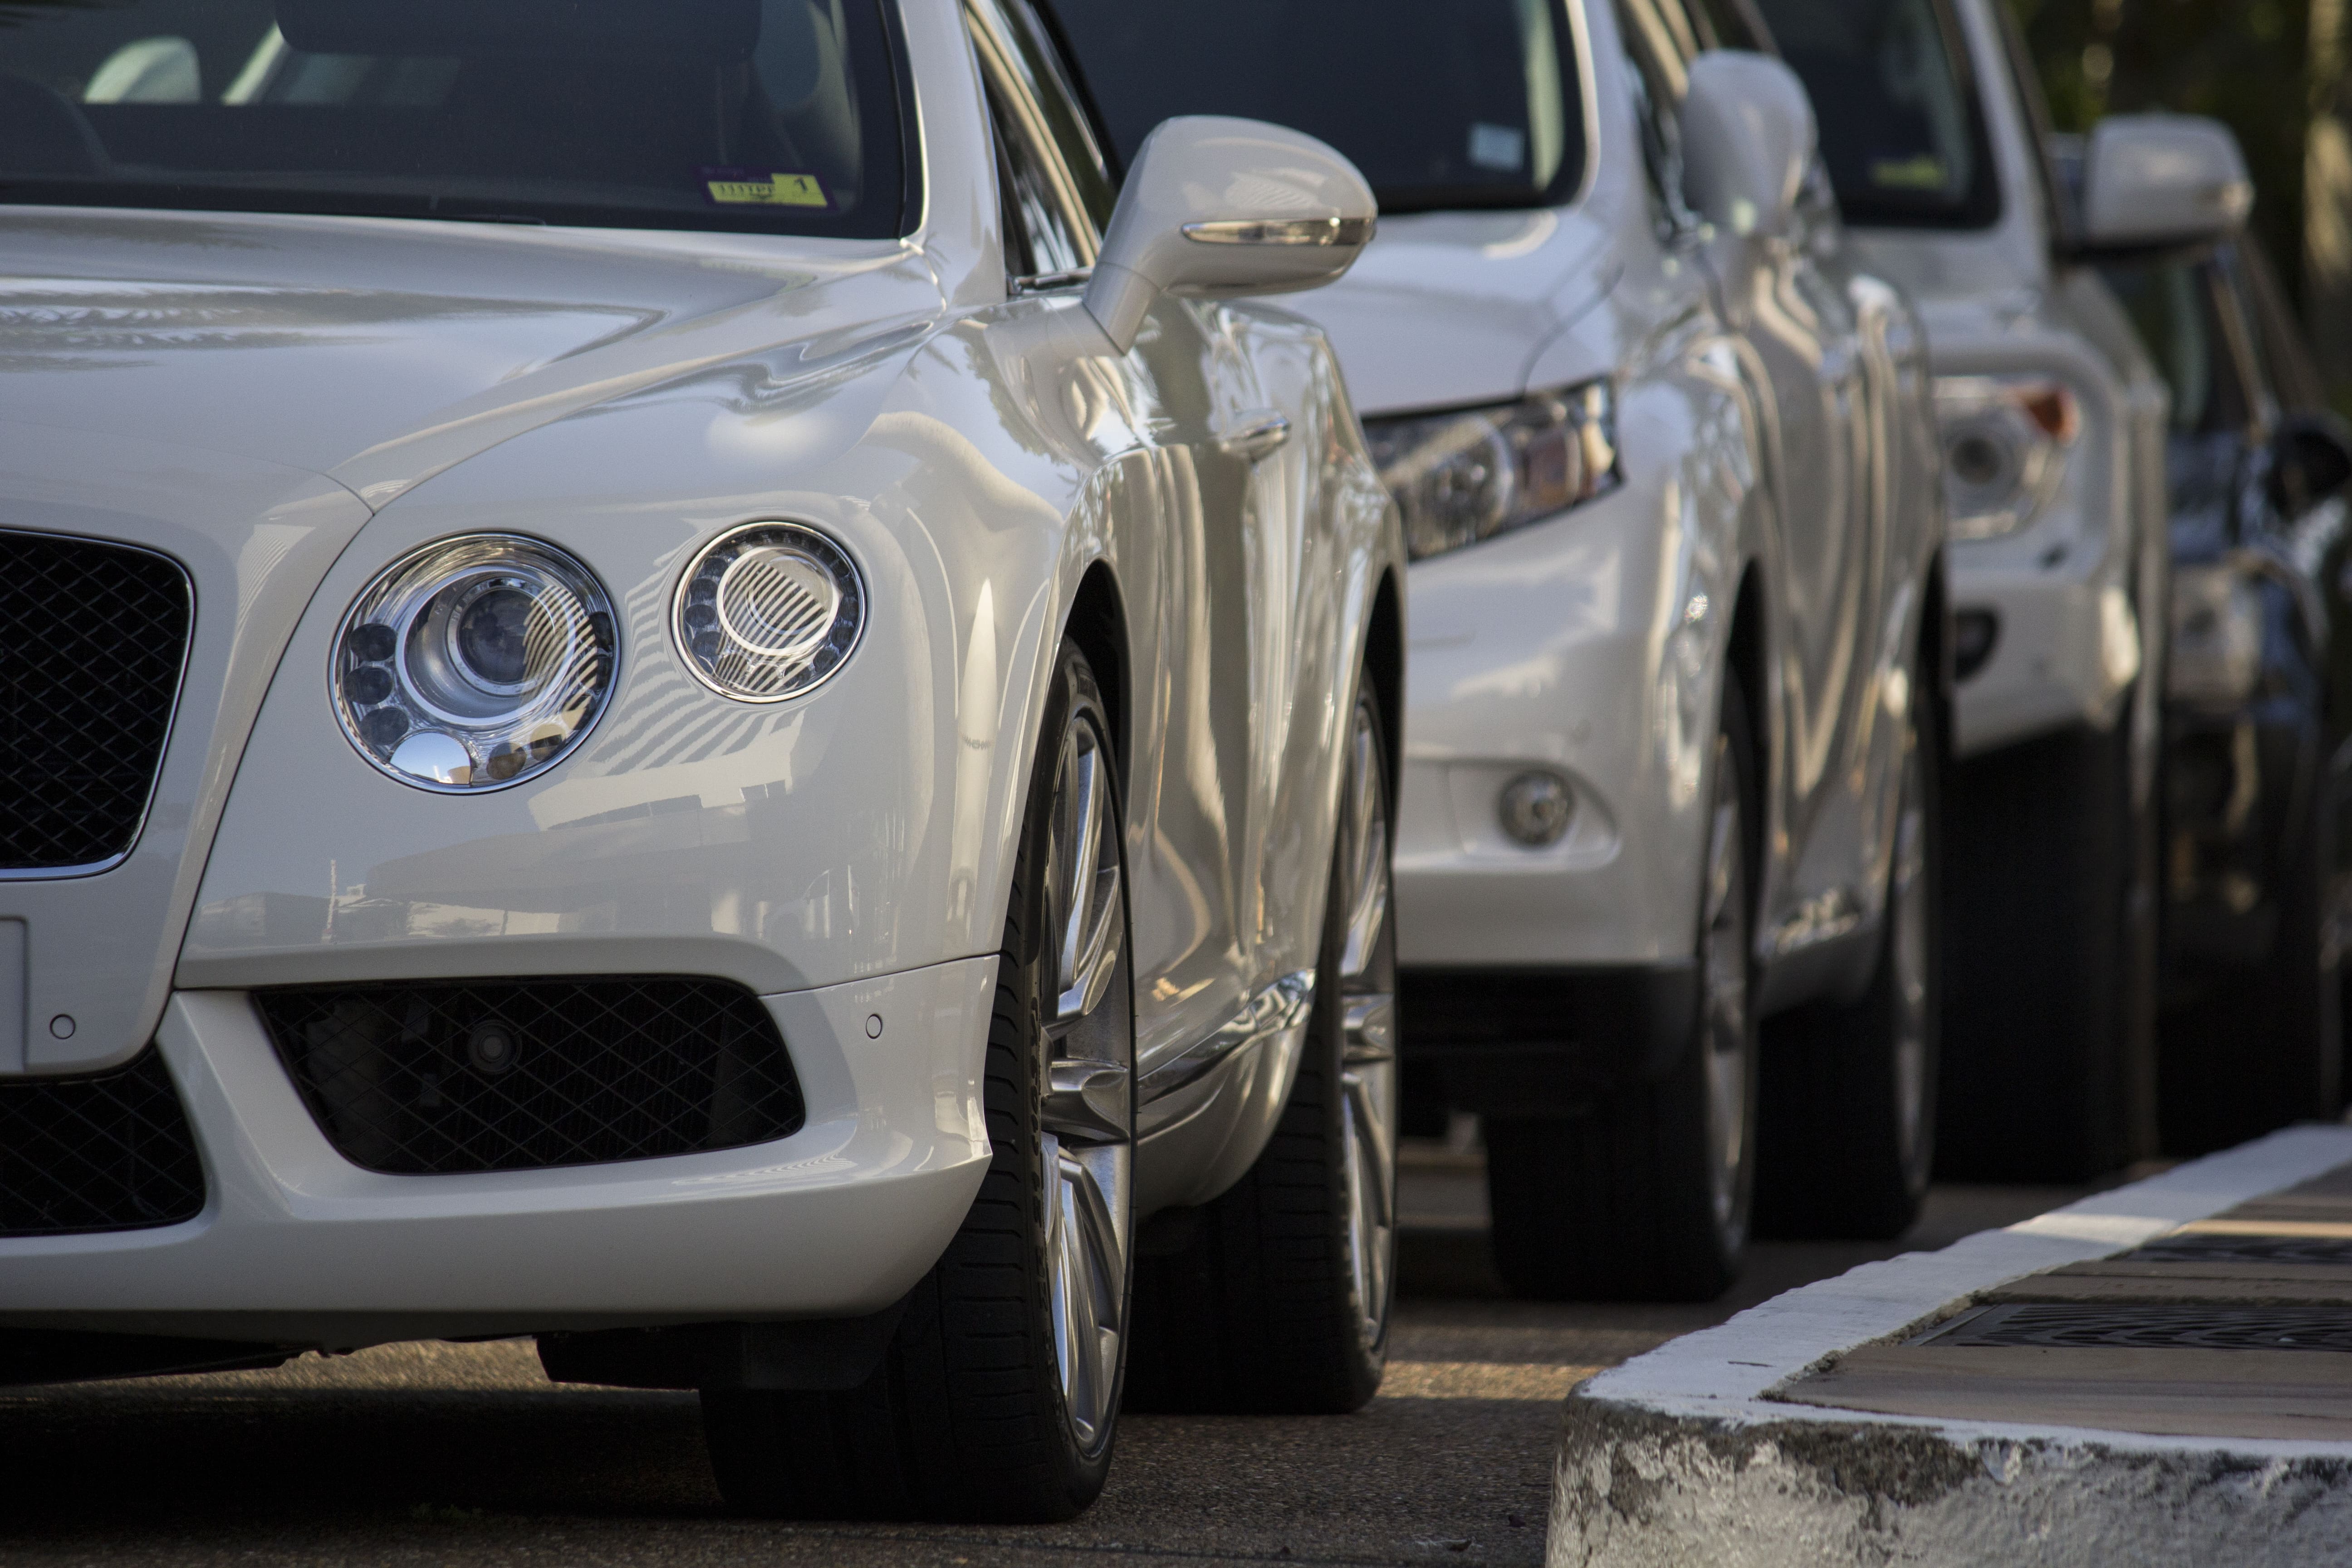 Bentley cars lined up